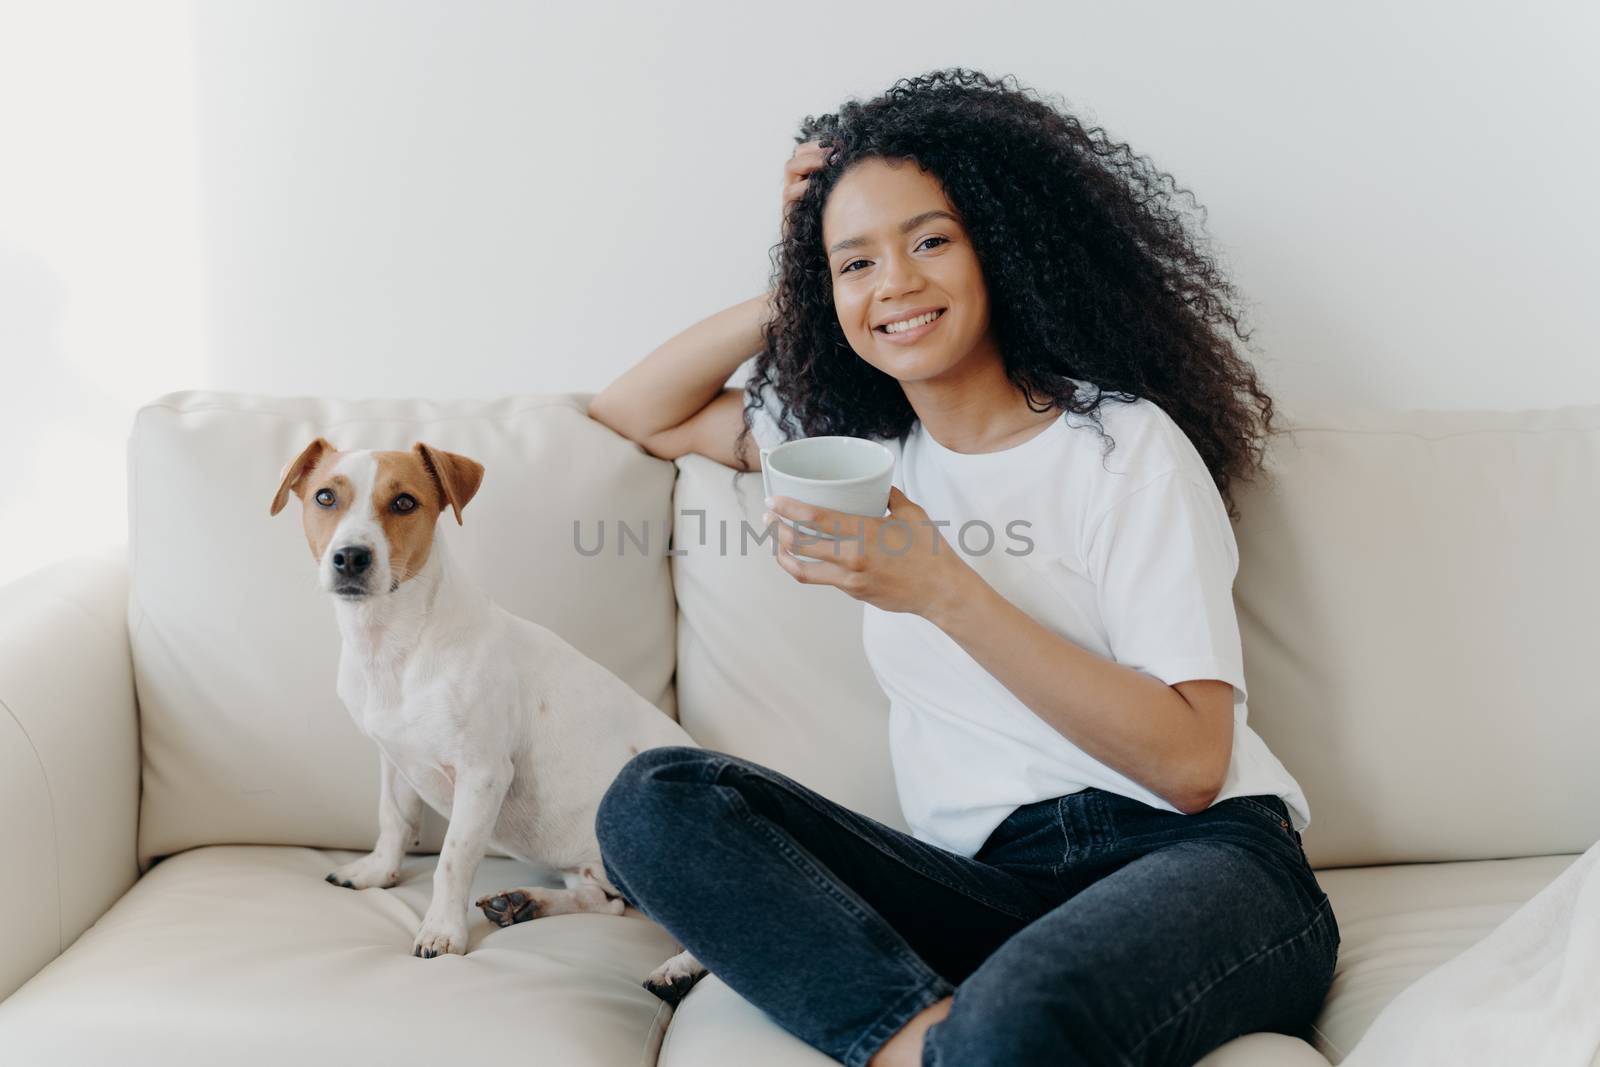 Beautiful woman with Afro haircut, drinks coffee, poses in living room at sofa with pedigree dog, wears white t shirt and jeans, enjoys coziness and comfort at home. People, animals, lifestyle by vkstock